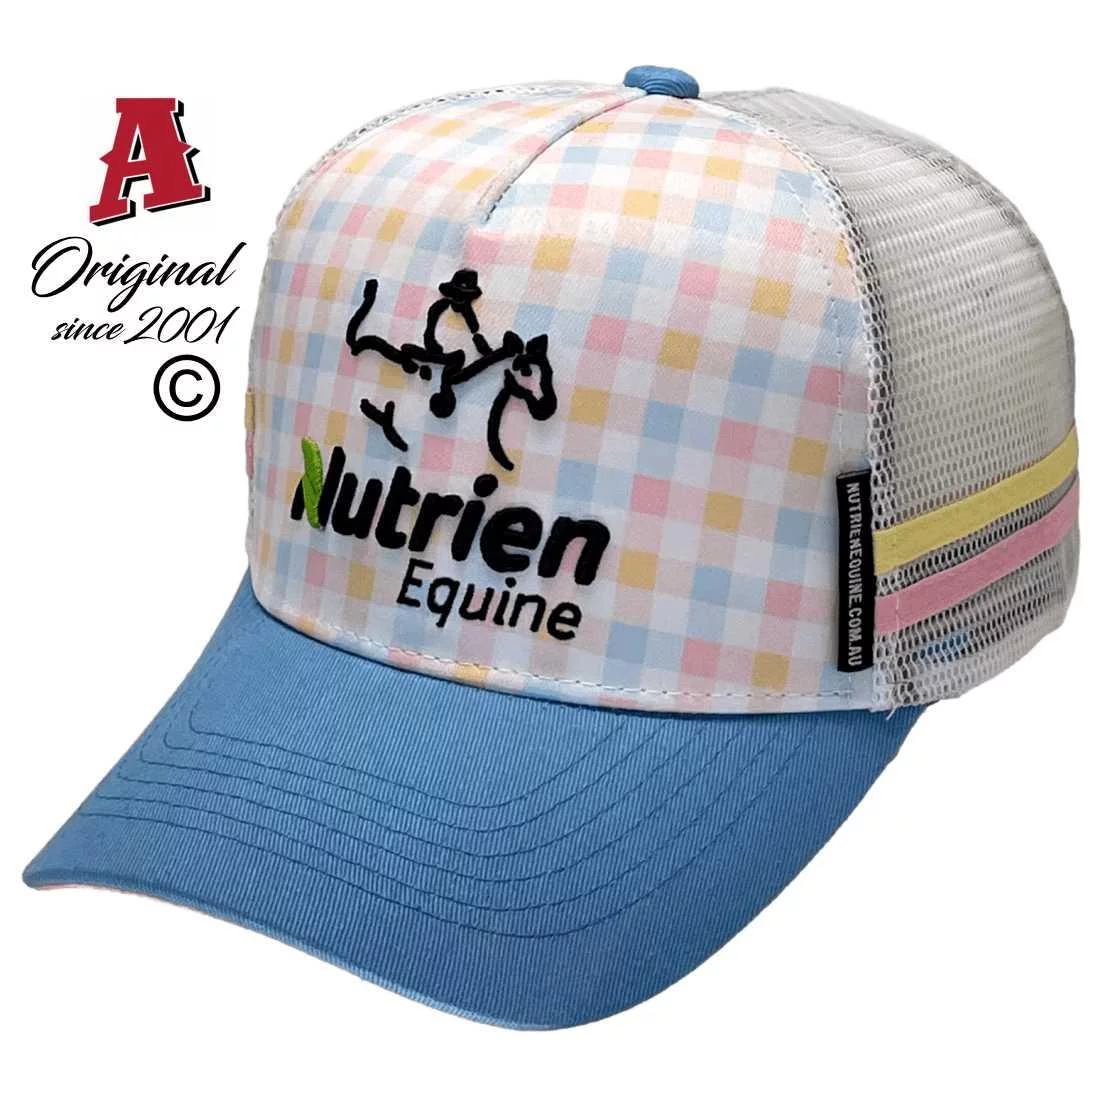 Nutrien Equine Tamworth NSW LP Aussie Midrange Trucker Hats with Double SideBands and Australian HeadFit Crown Sublimated Gingham Crown